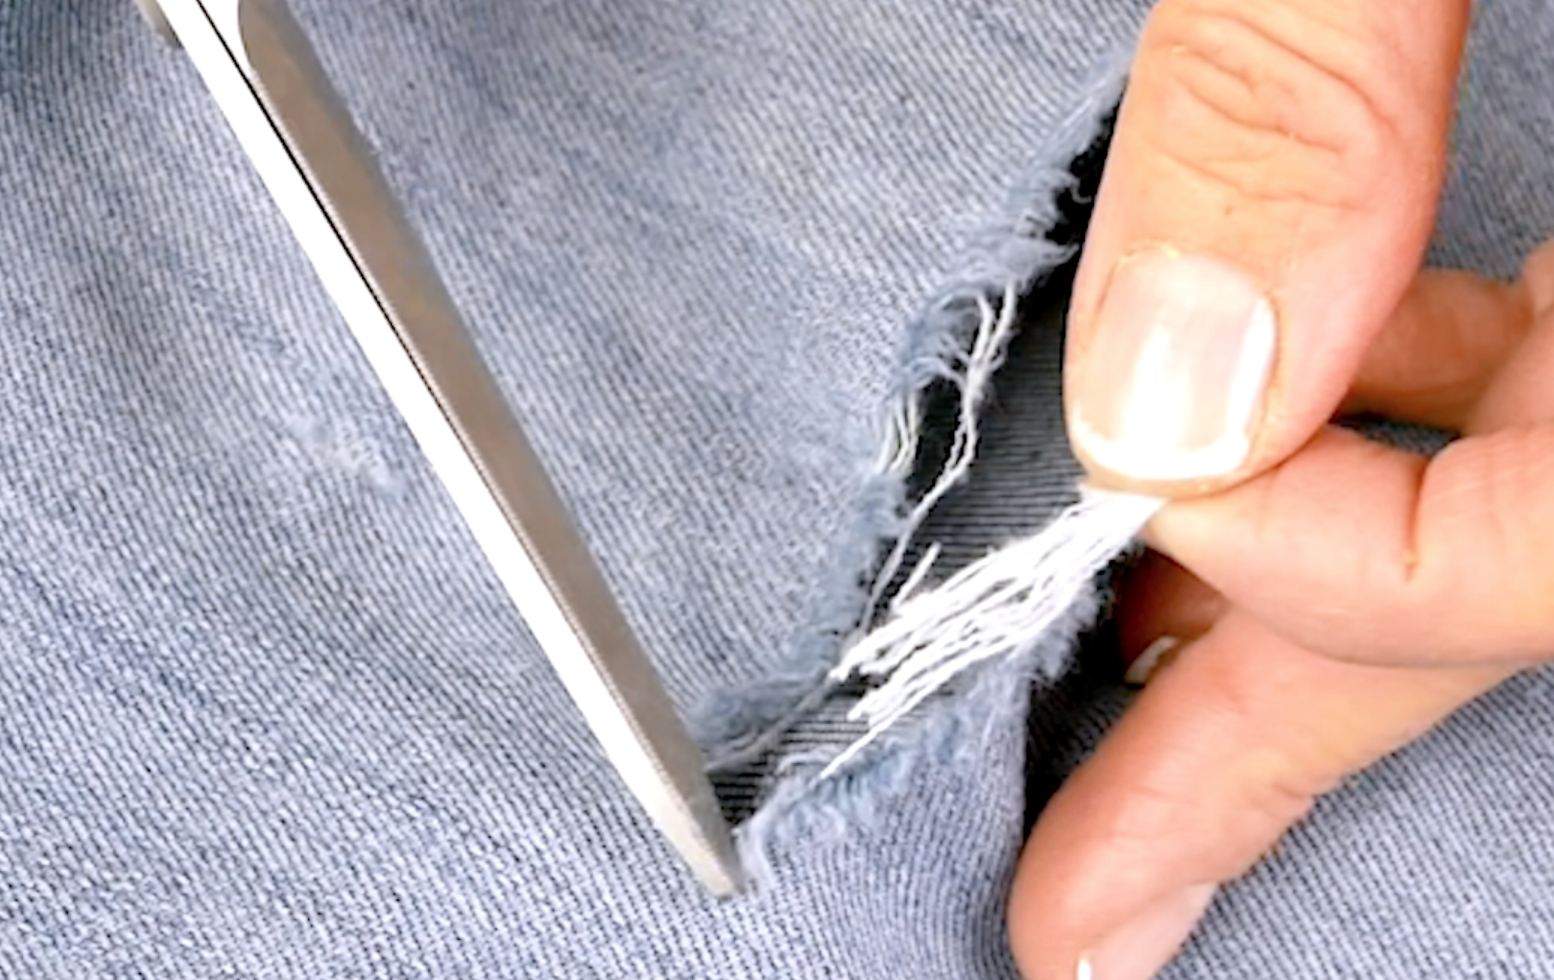 How to Fix Ripped Jeans - No Sewing Machine Required - Melly Sews